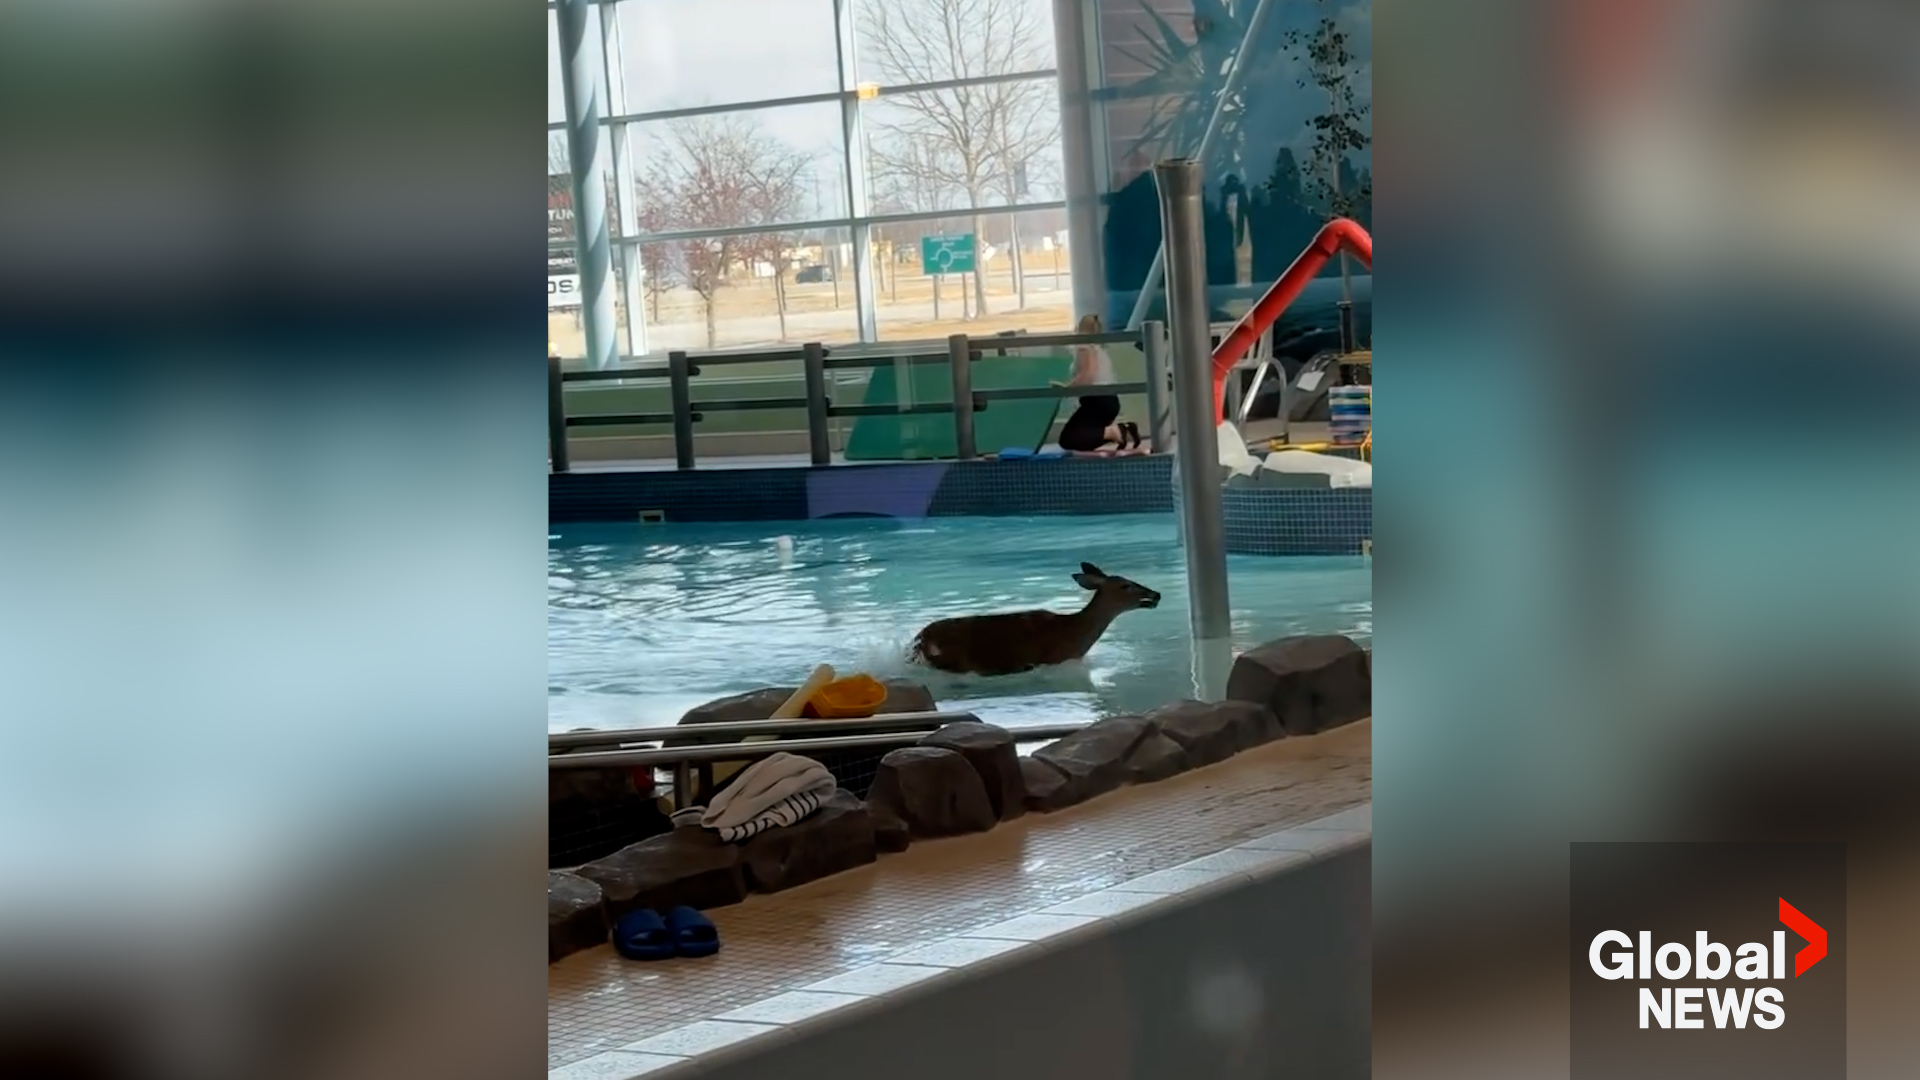 This deer took a plunge into an indoor Ontario rec centre pool. Chaos ensued